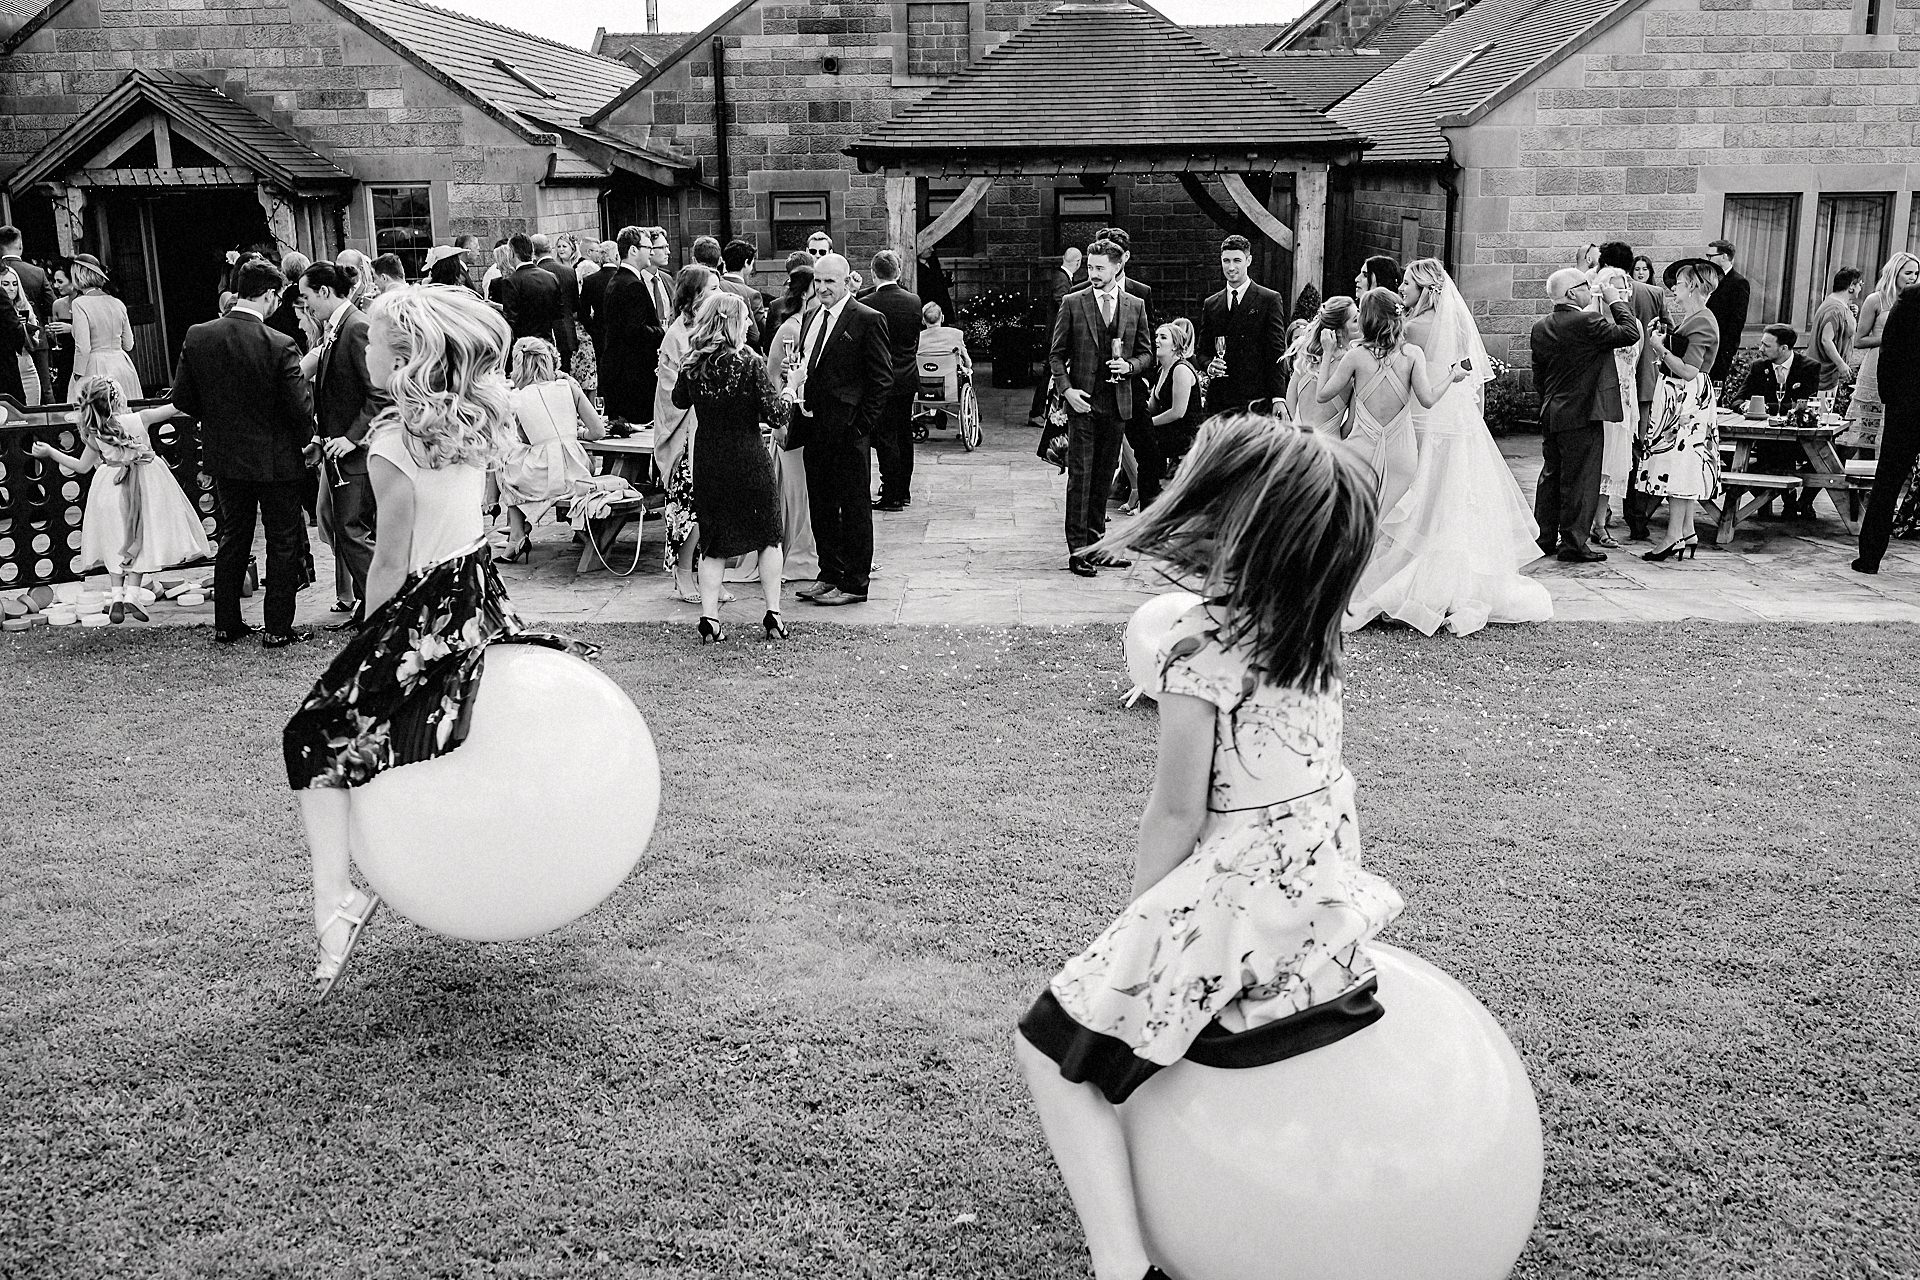 space hoppers at the wedding reception